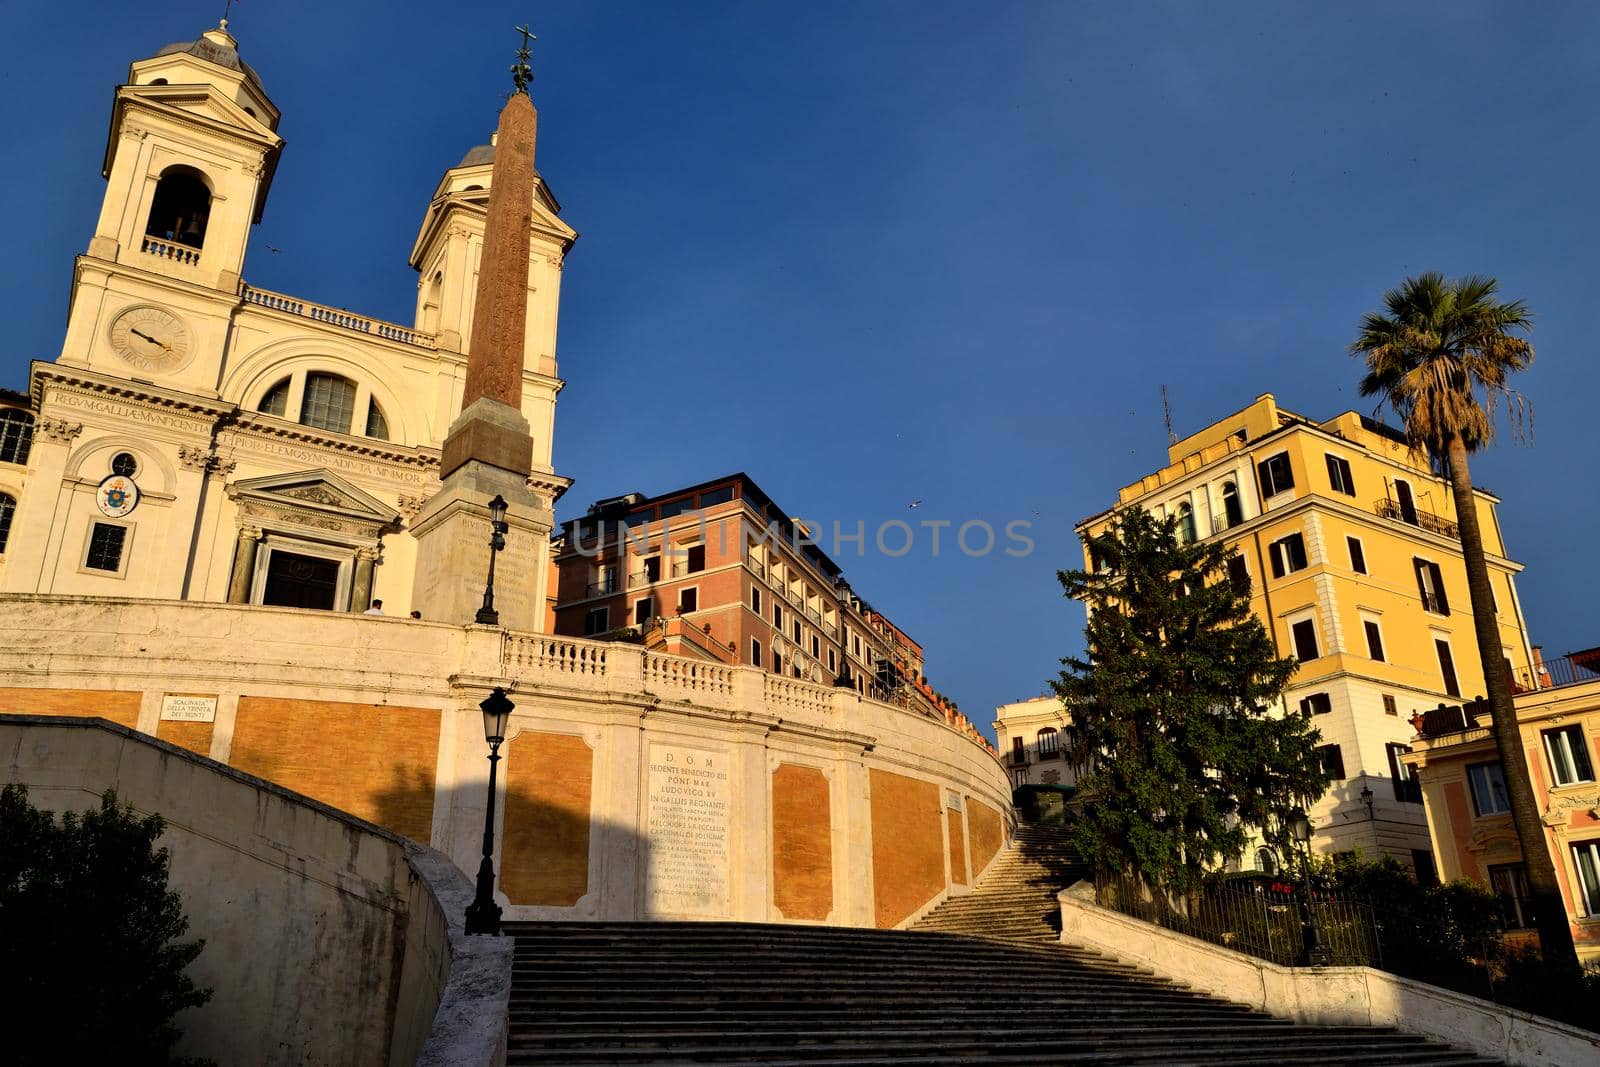 May 8th 2020, Rome, Italy: View of the Trinita dei Monti without tourists due to the phase 2 of lockdown